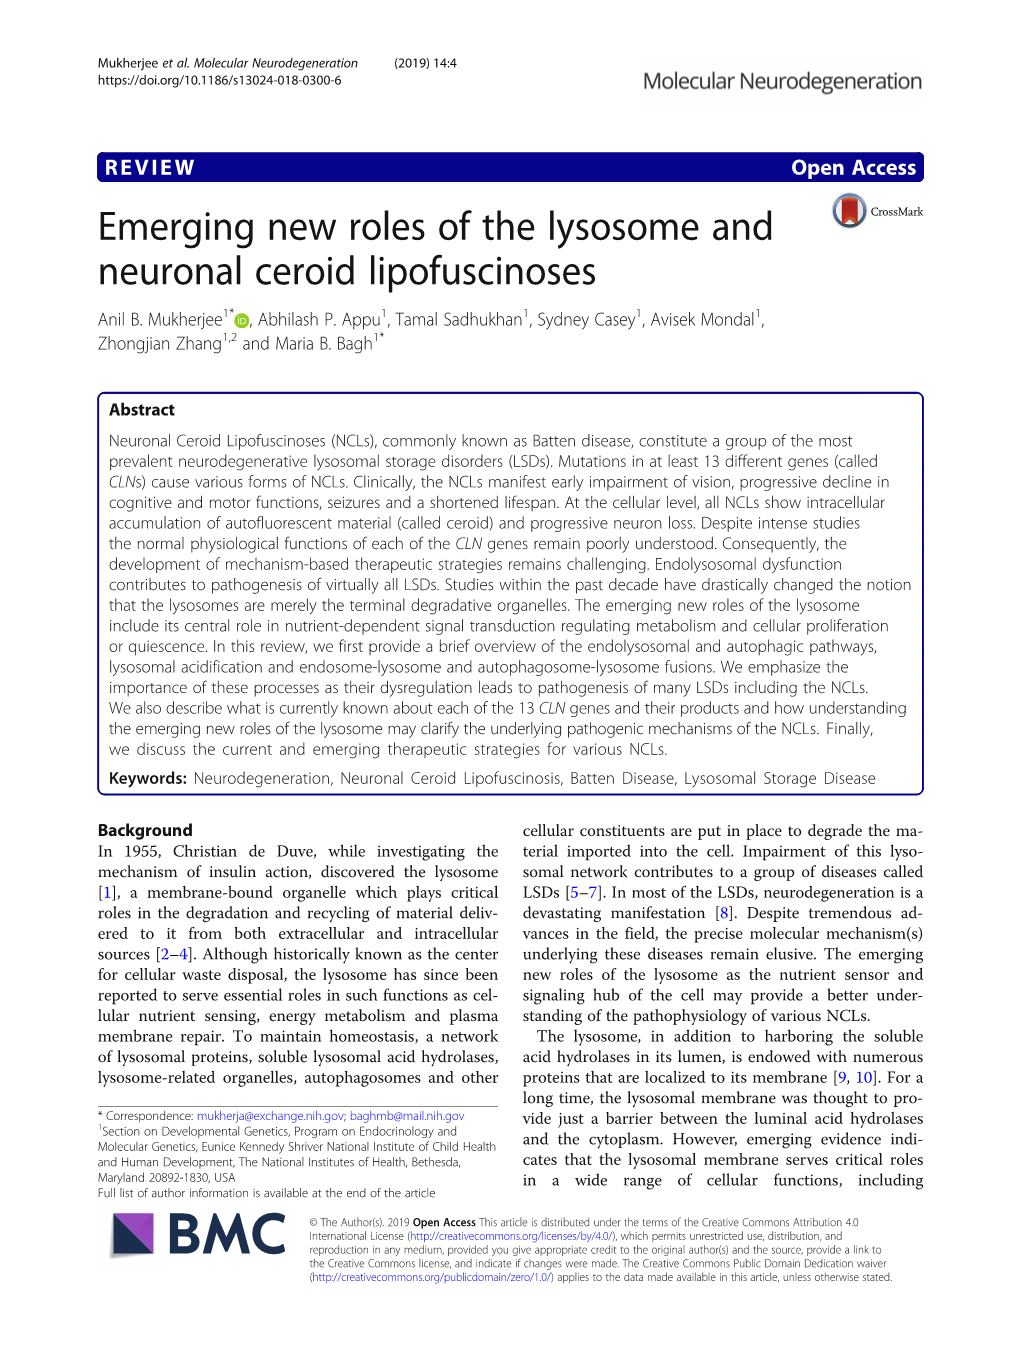 Emerging New Roles of the Lysosome and Neuronal Ceroid Lipofuscinoses Anil B